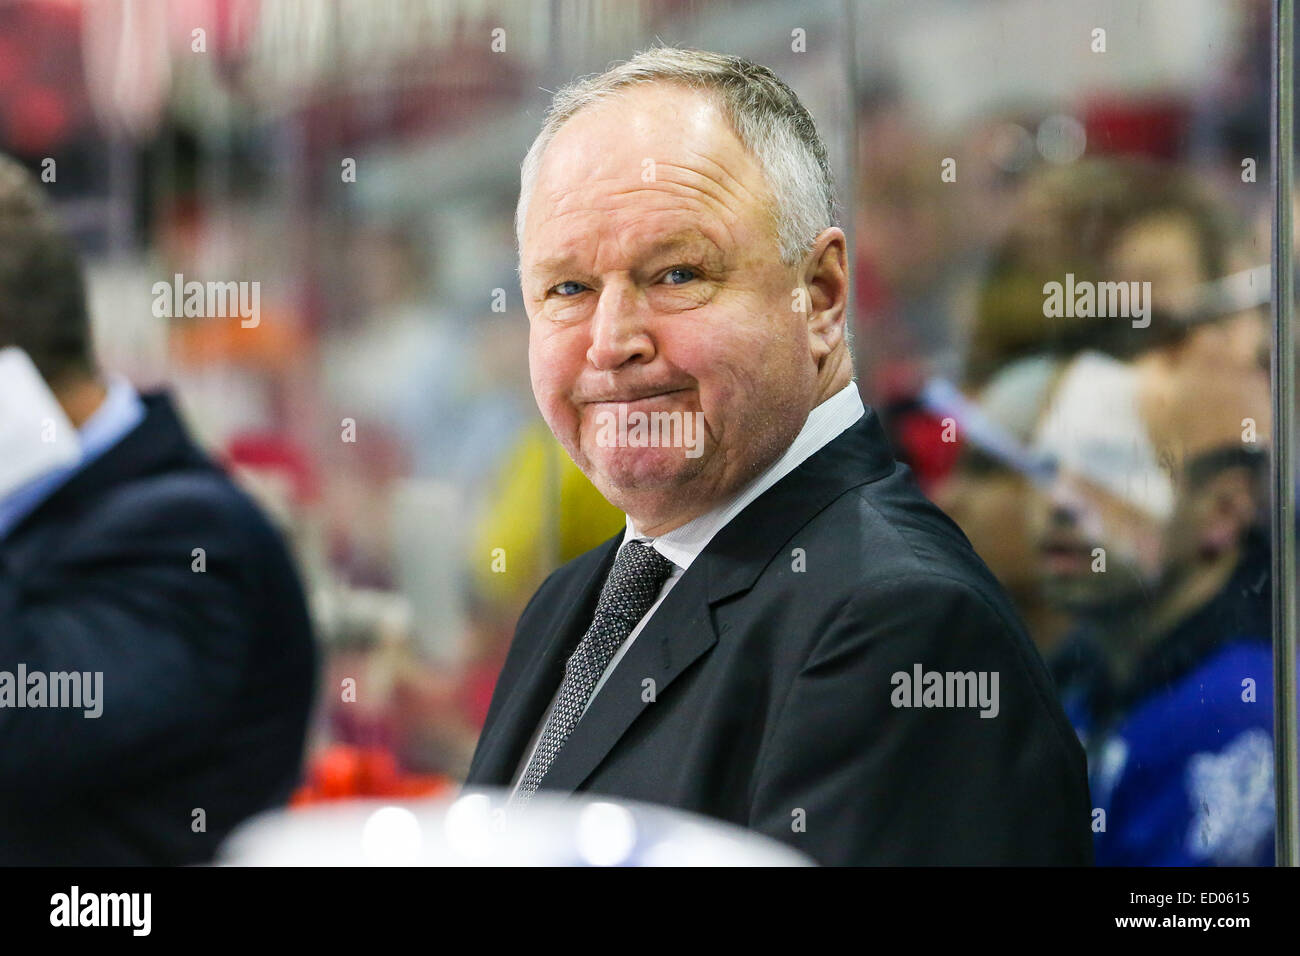 Toronto Maple Leafs head coach Randy Carlyle during the NHL game between the Toronto Maple Leafs and the Carolina Hurricanes at the PNC Arena.  The Carolina Hurricanes defeated the Toronto Maple Leafs 4-1. Stock Photo